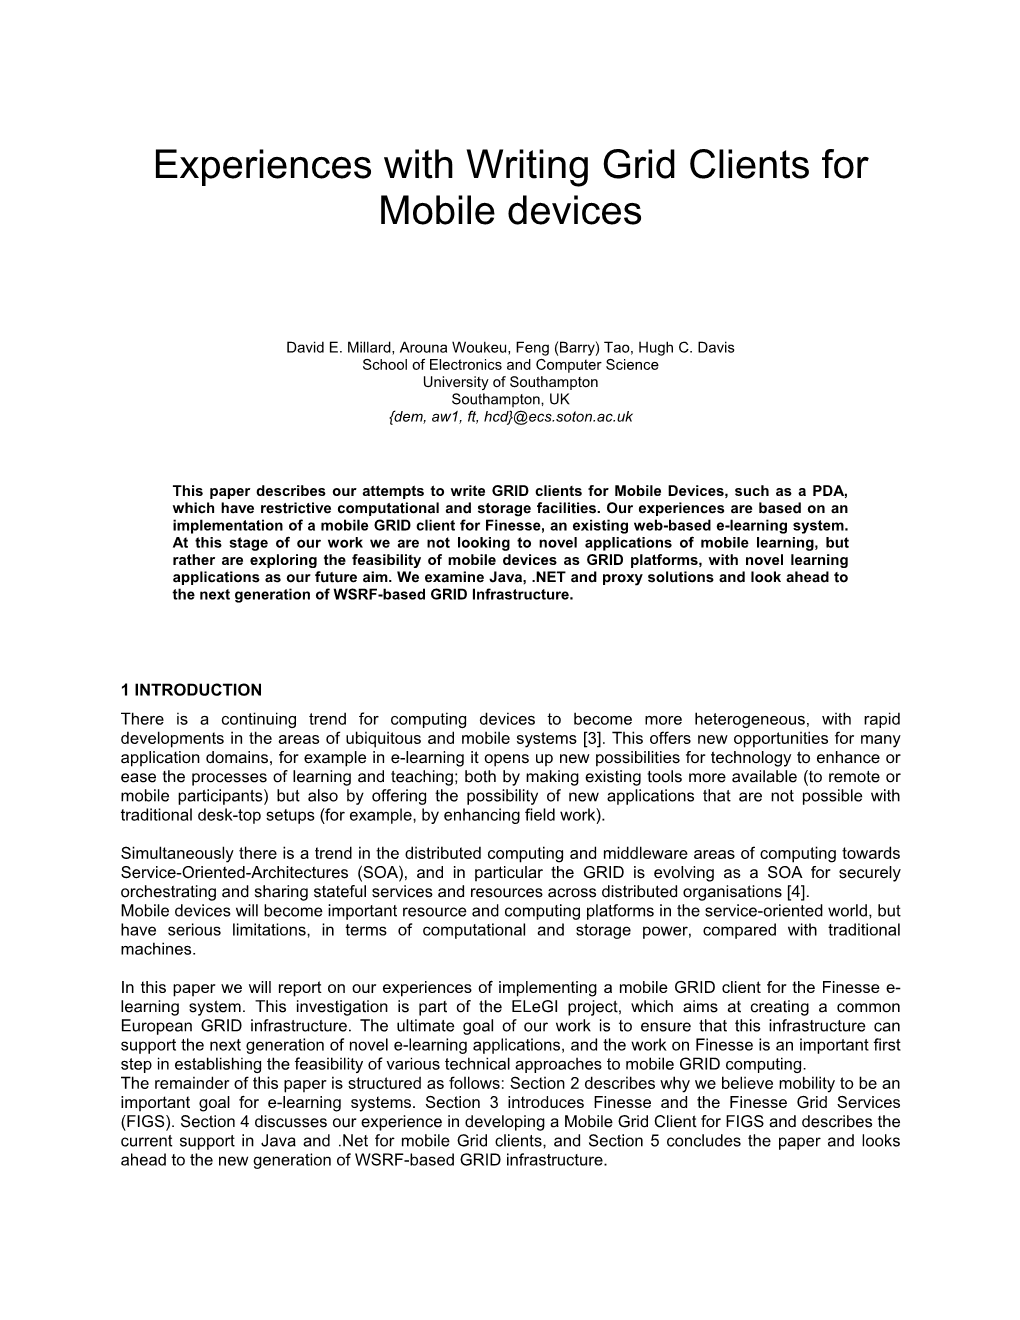 Experiences with Writing Grid Clients for Mobile Devices